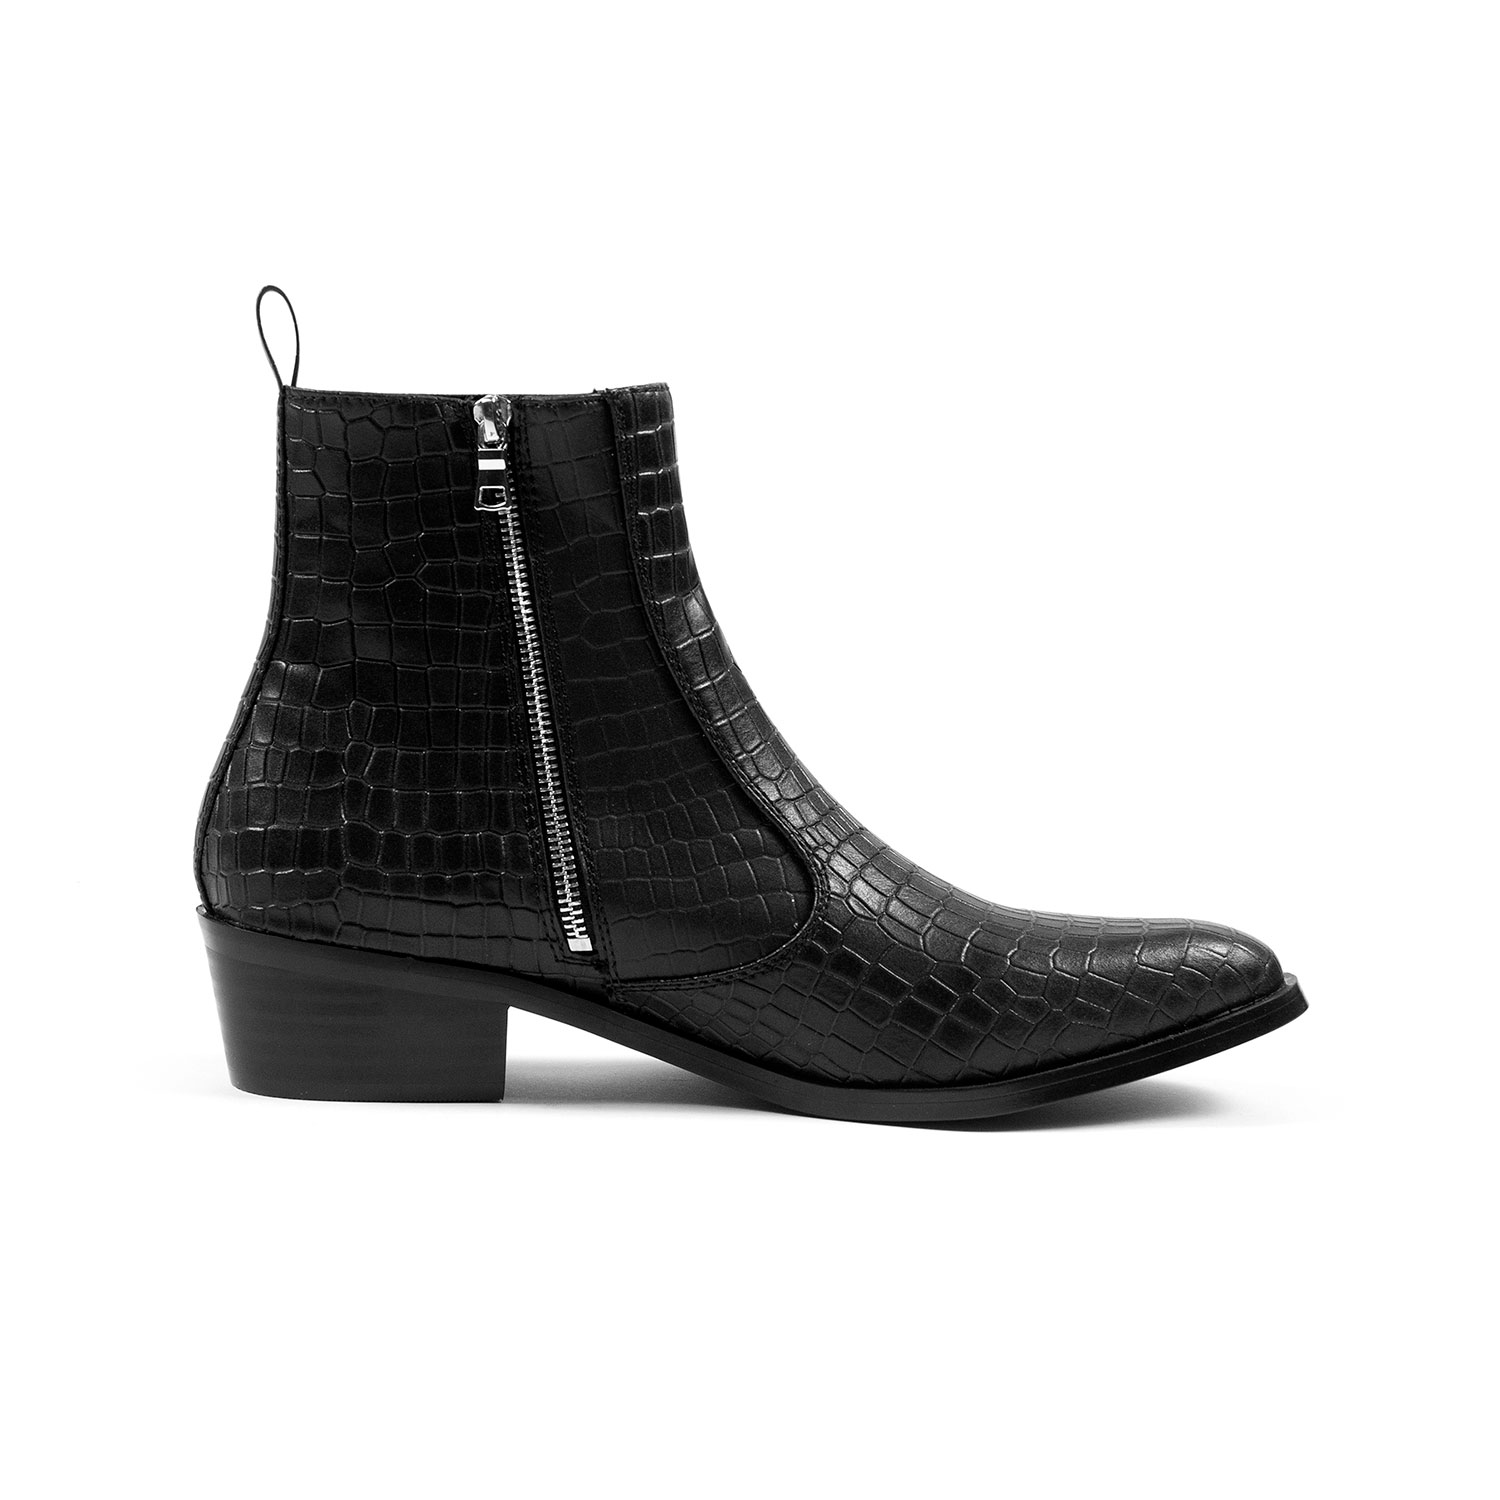 Vegan Richards - Black Snakeskin Faux Leather Zip Boots | Straight To ...